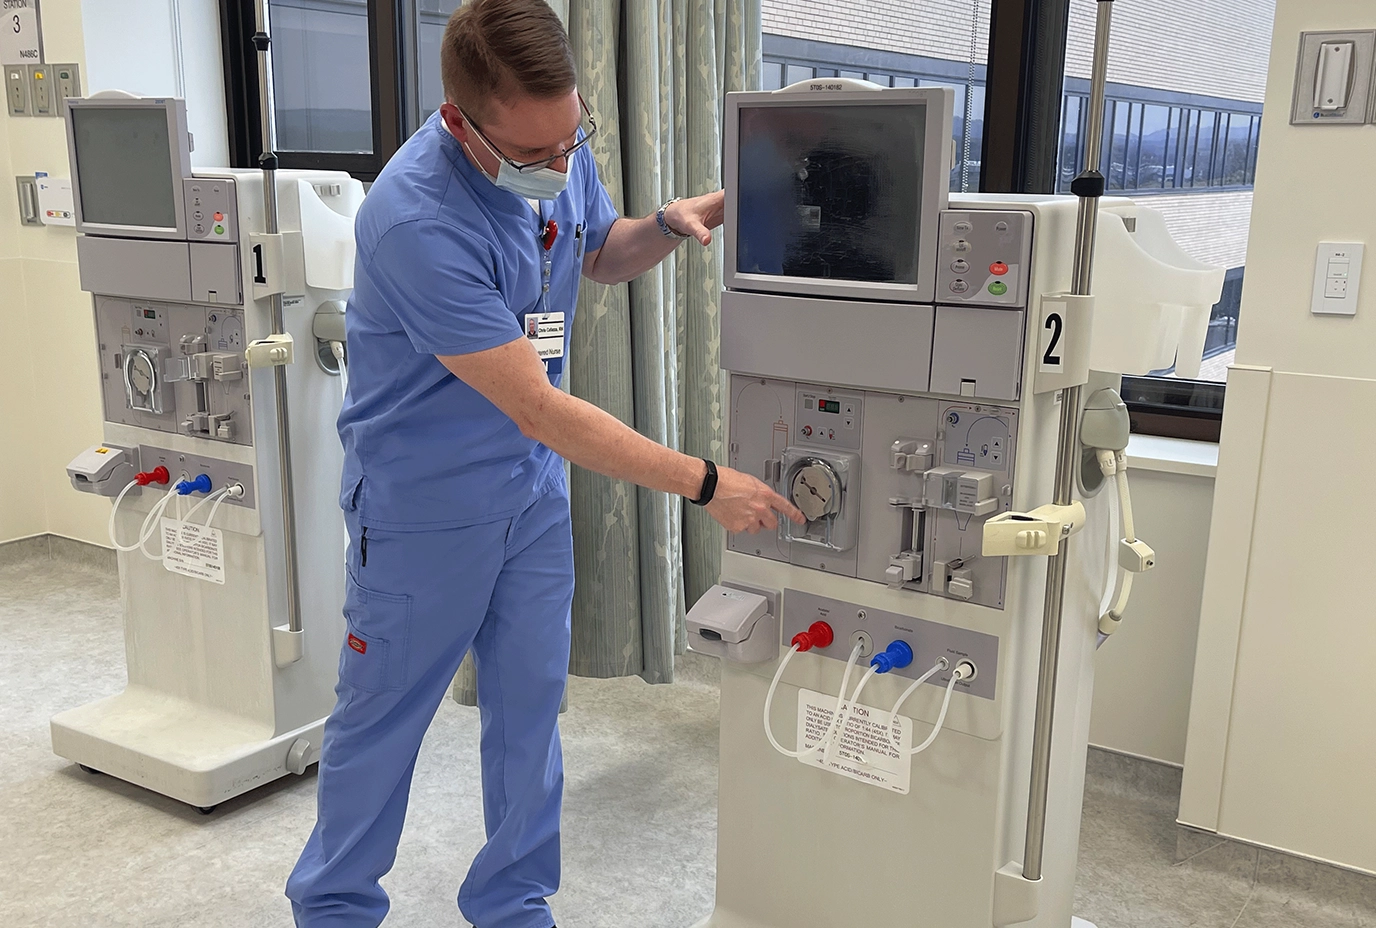 A nurse interacts with the dialysis machinery